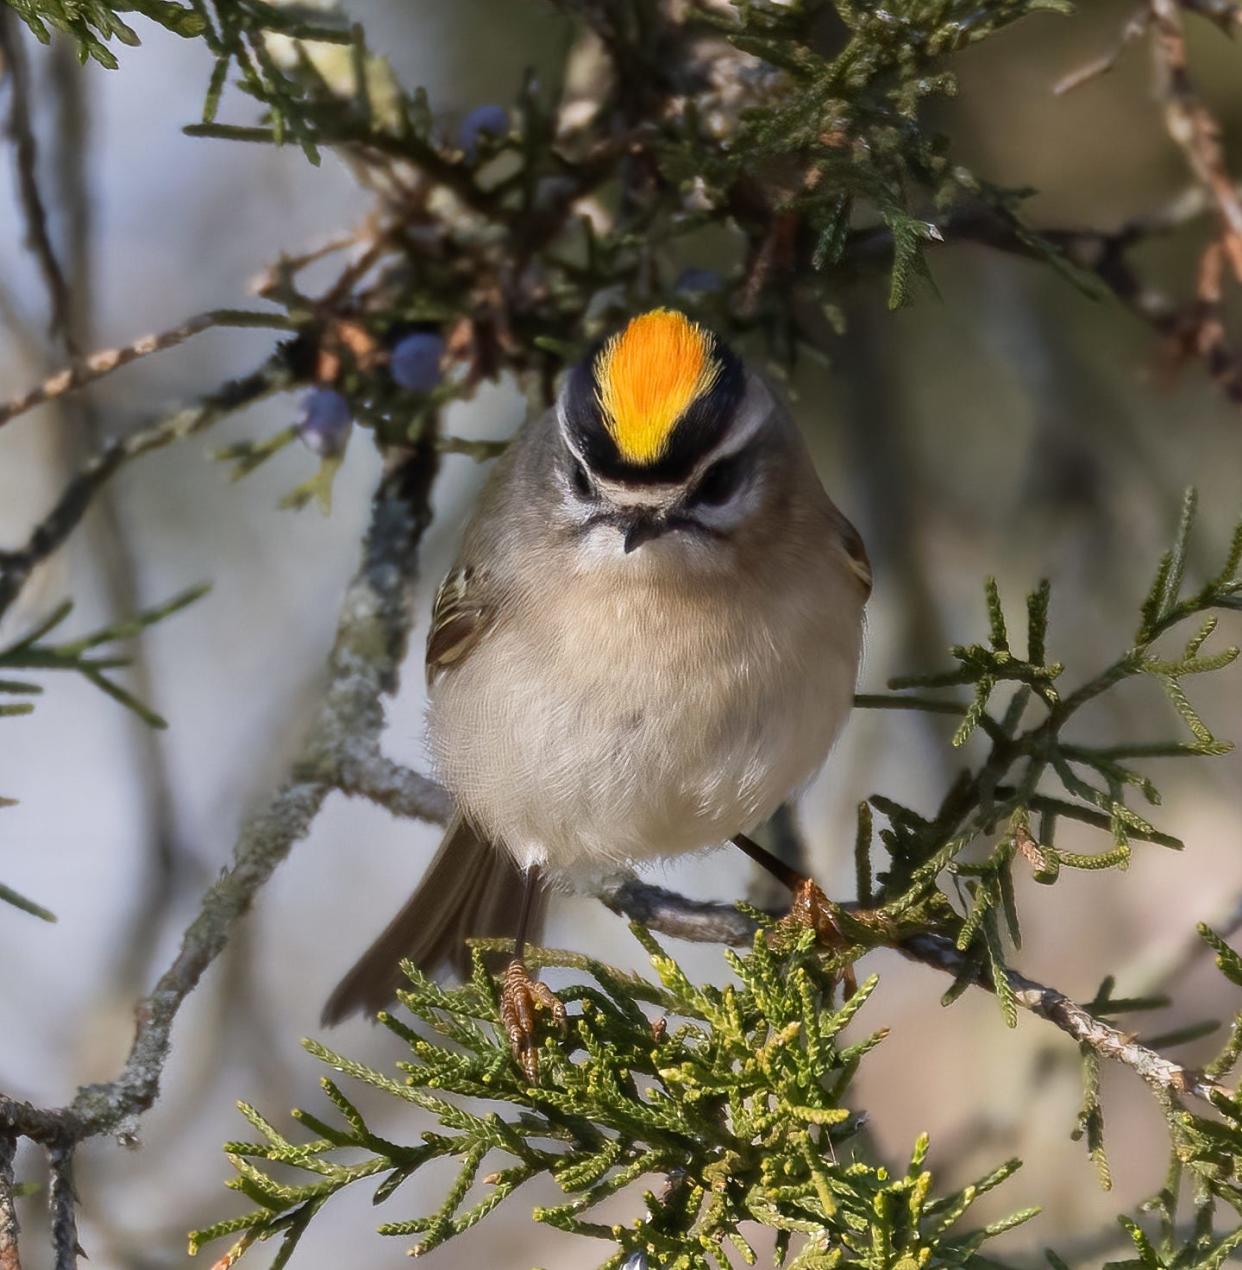 When agitated, golden-crowned kinglets flare their brilliant crown feathers.